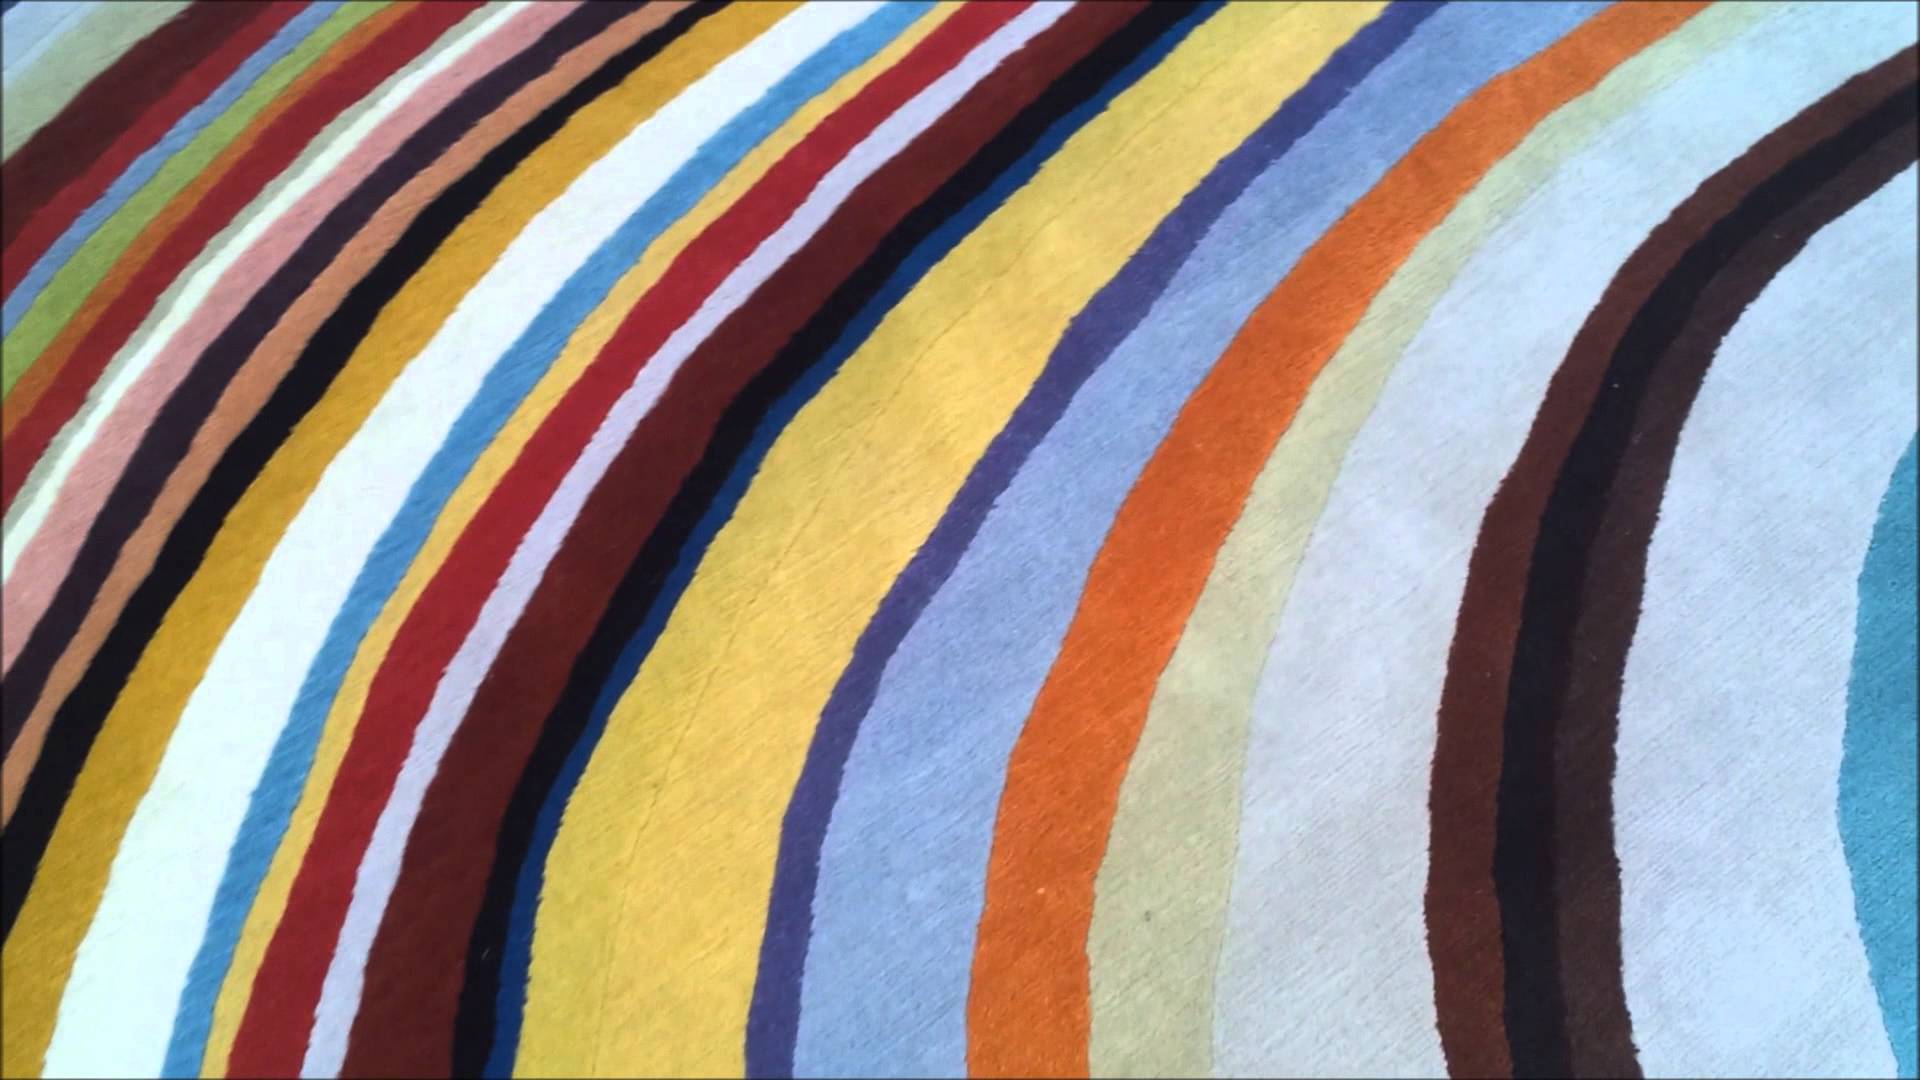 Plymouth Rug Cleaning Designer Paul Smith Rug - YouTube